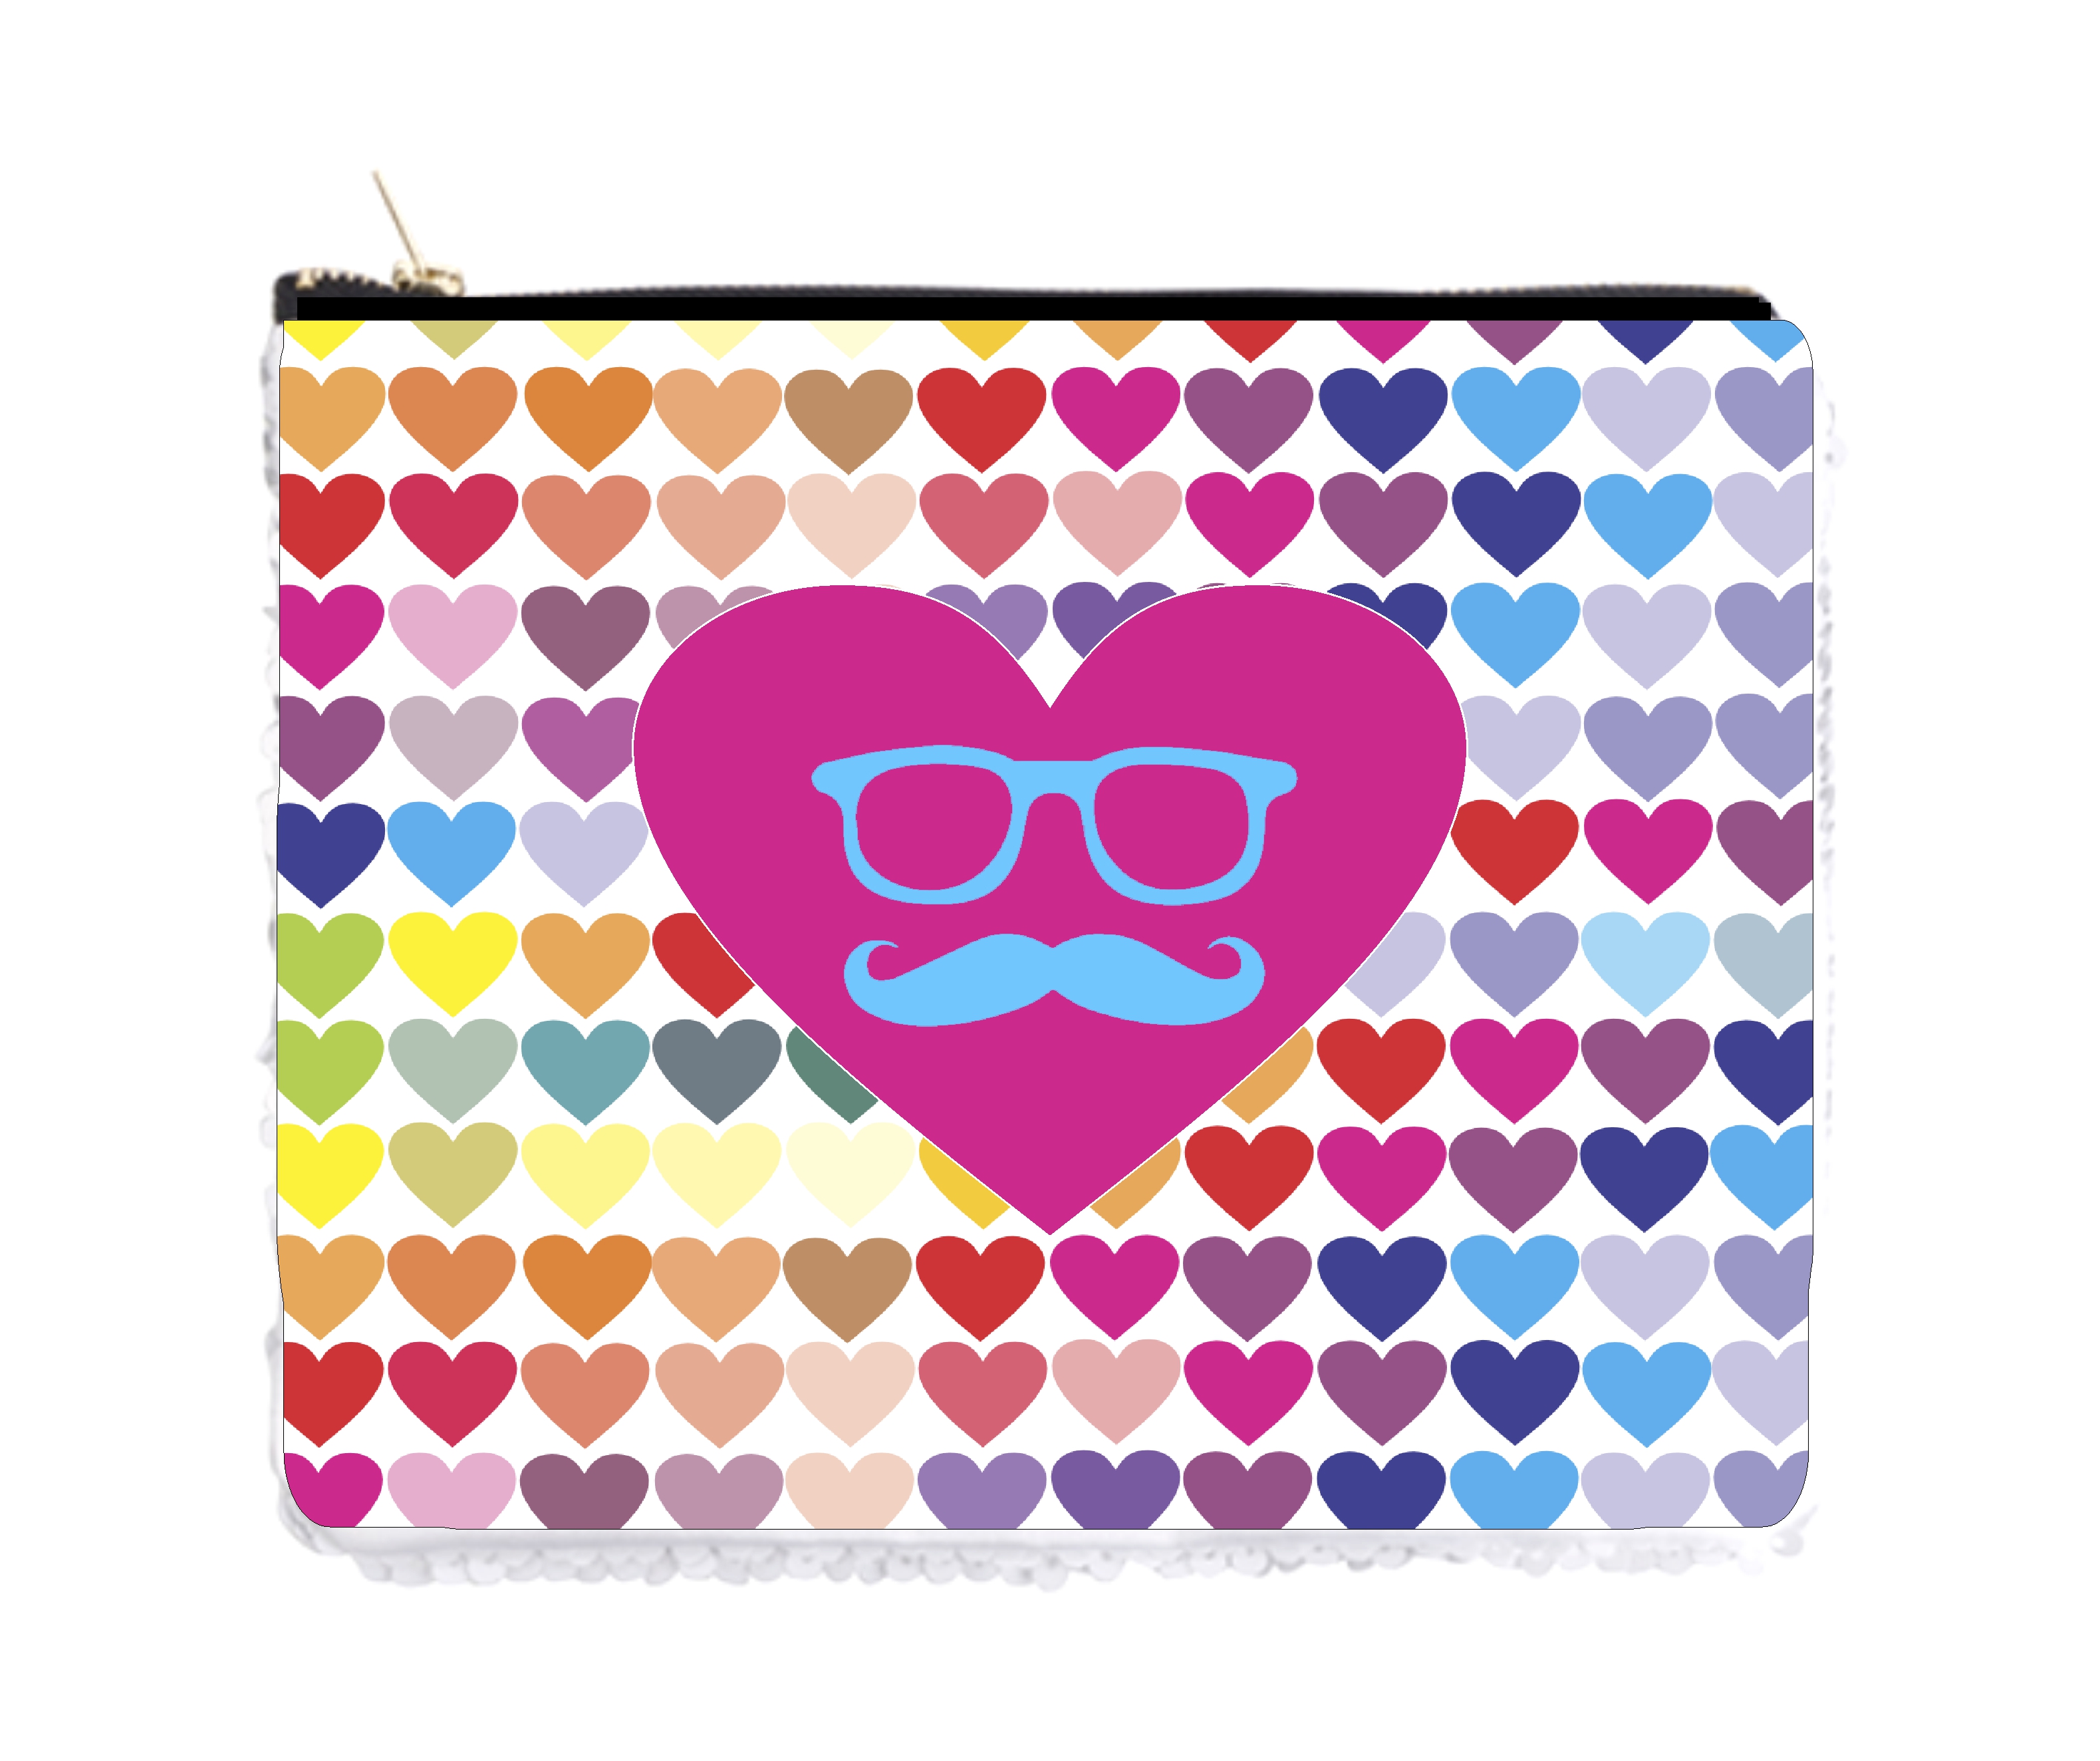 Glasses and Mustache Hipster Elements - Colorful Hearts Pattern Print Design - Double Sided 6.5" x 8" White/Silver Two-Tone Magic Sequin Cosmetic Makeup Bag / Case - image 1 of 4